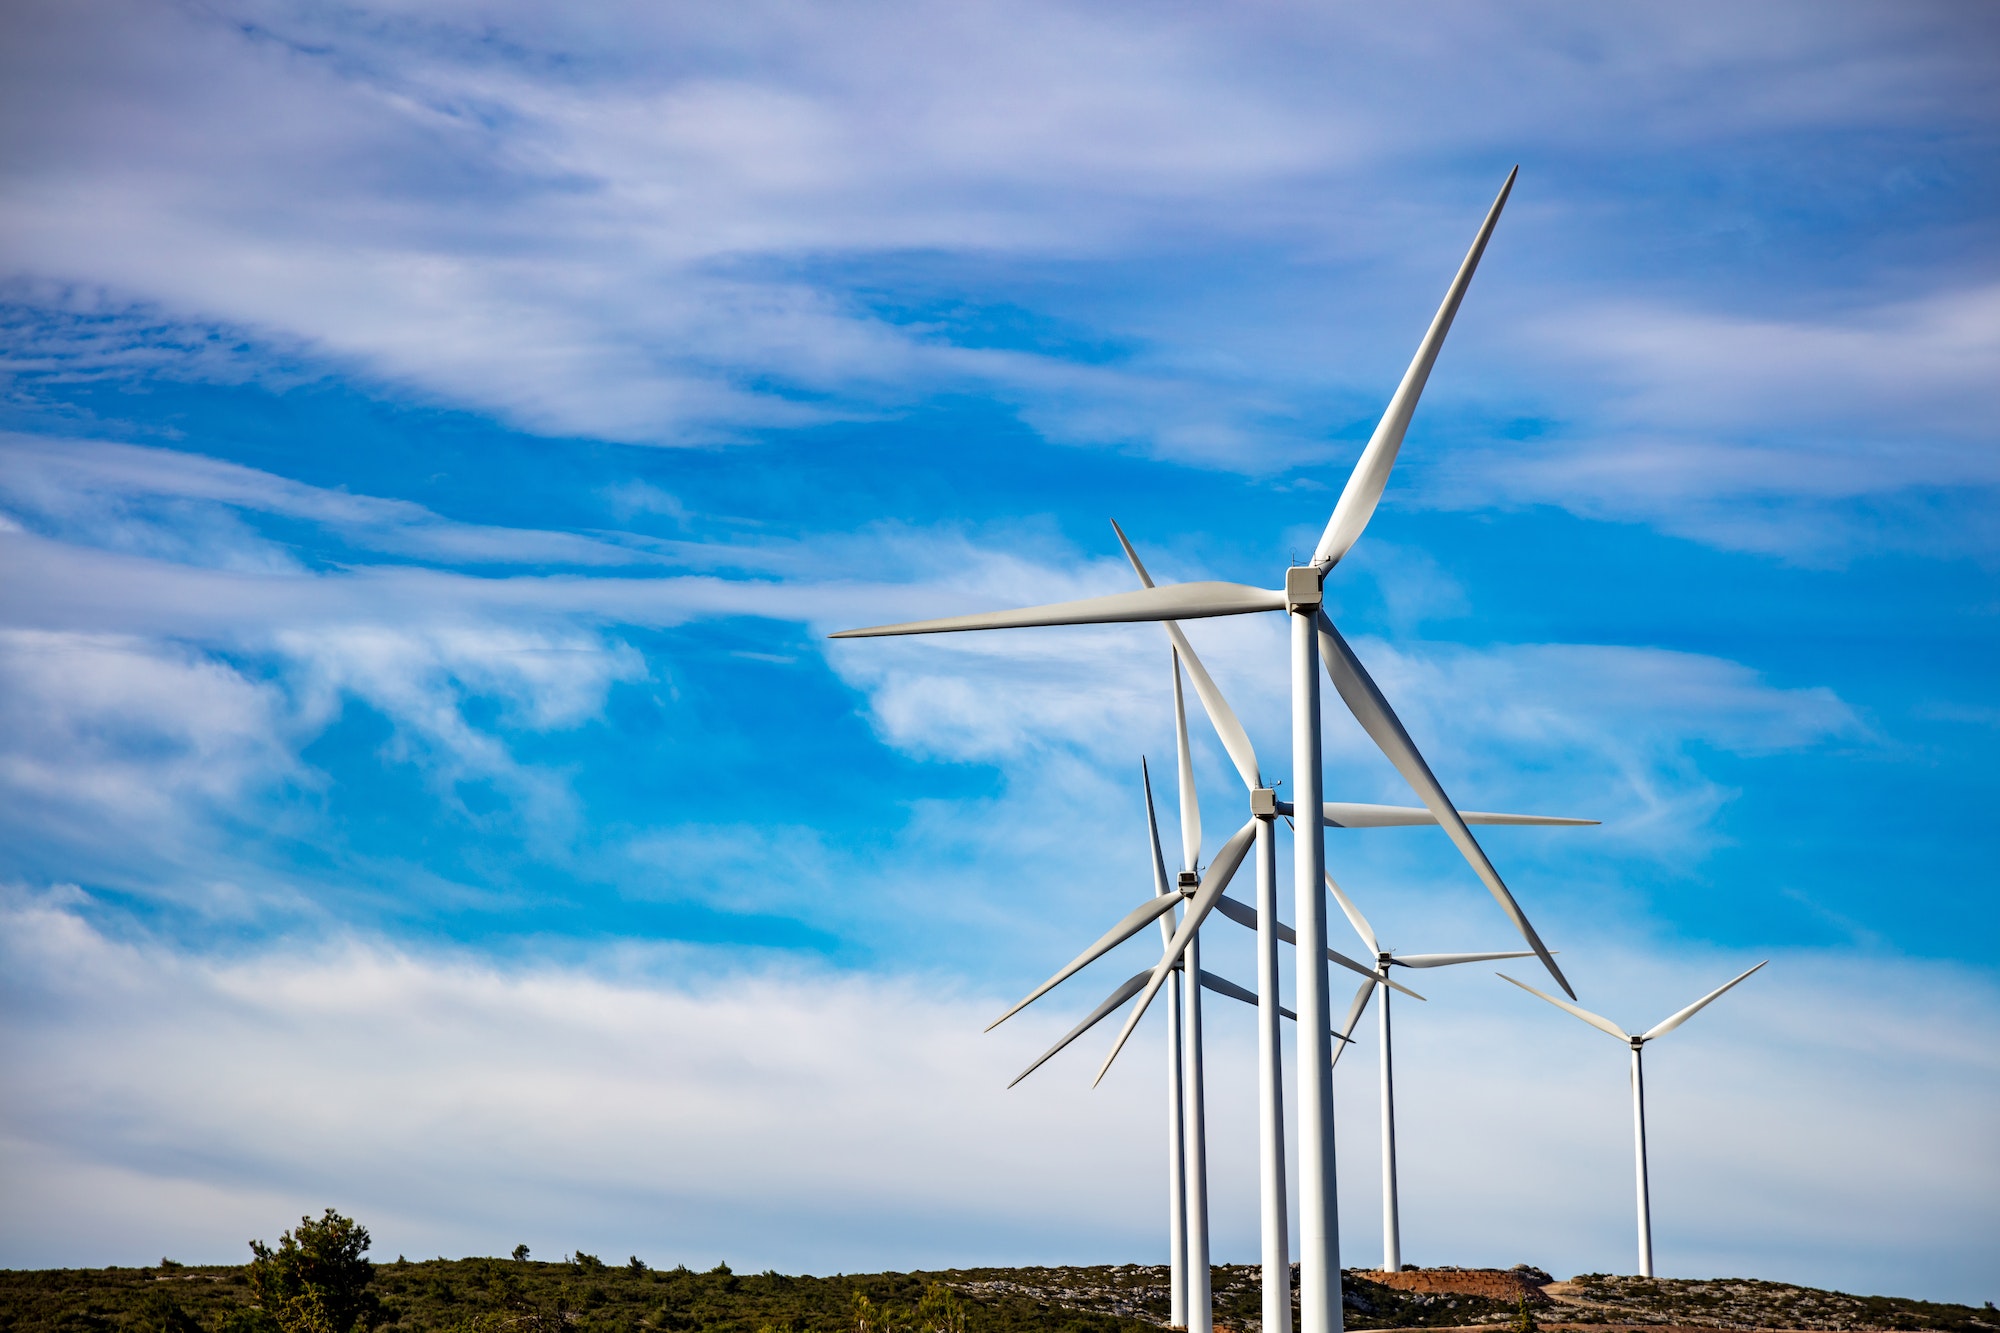 A row of wind turbines sitting on a rocky hill with a background of blue sky and wispy clouds